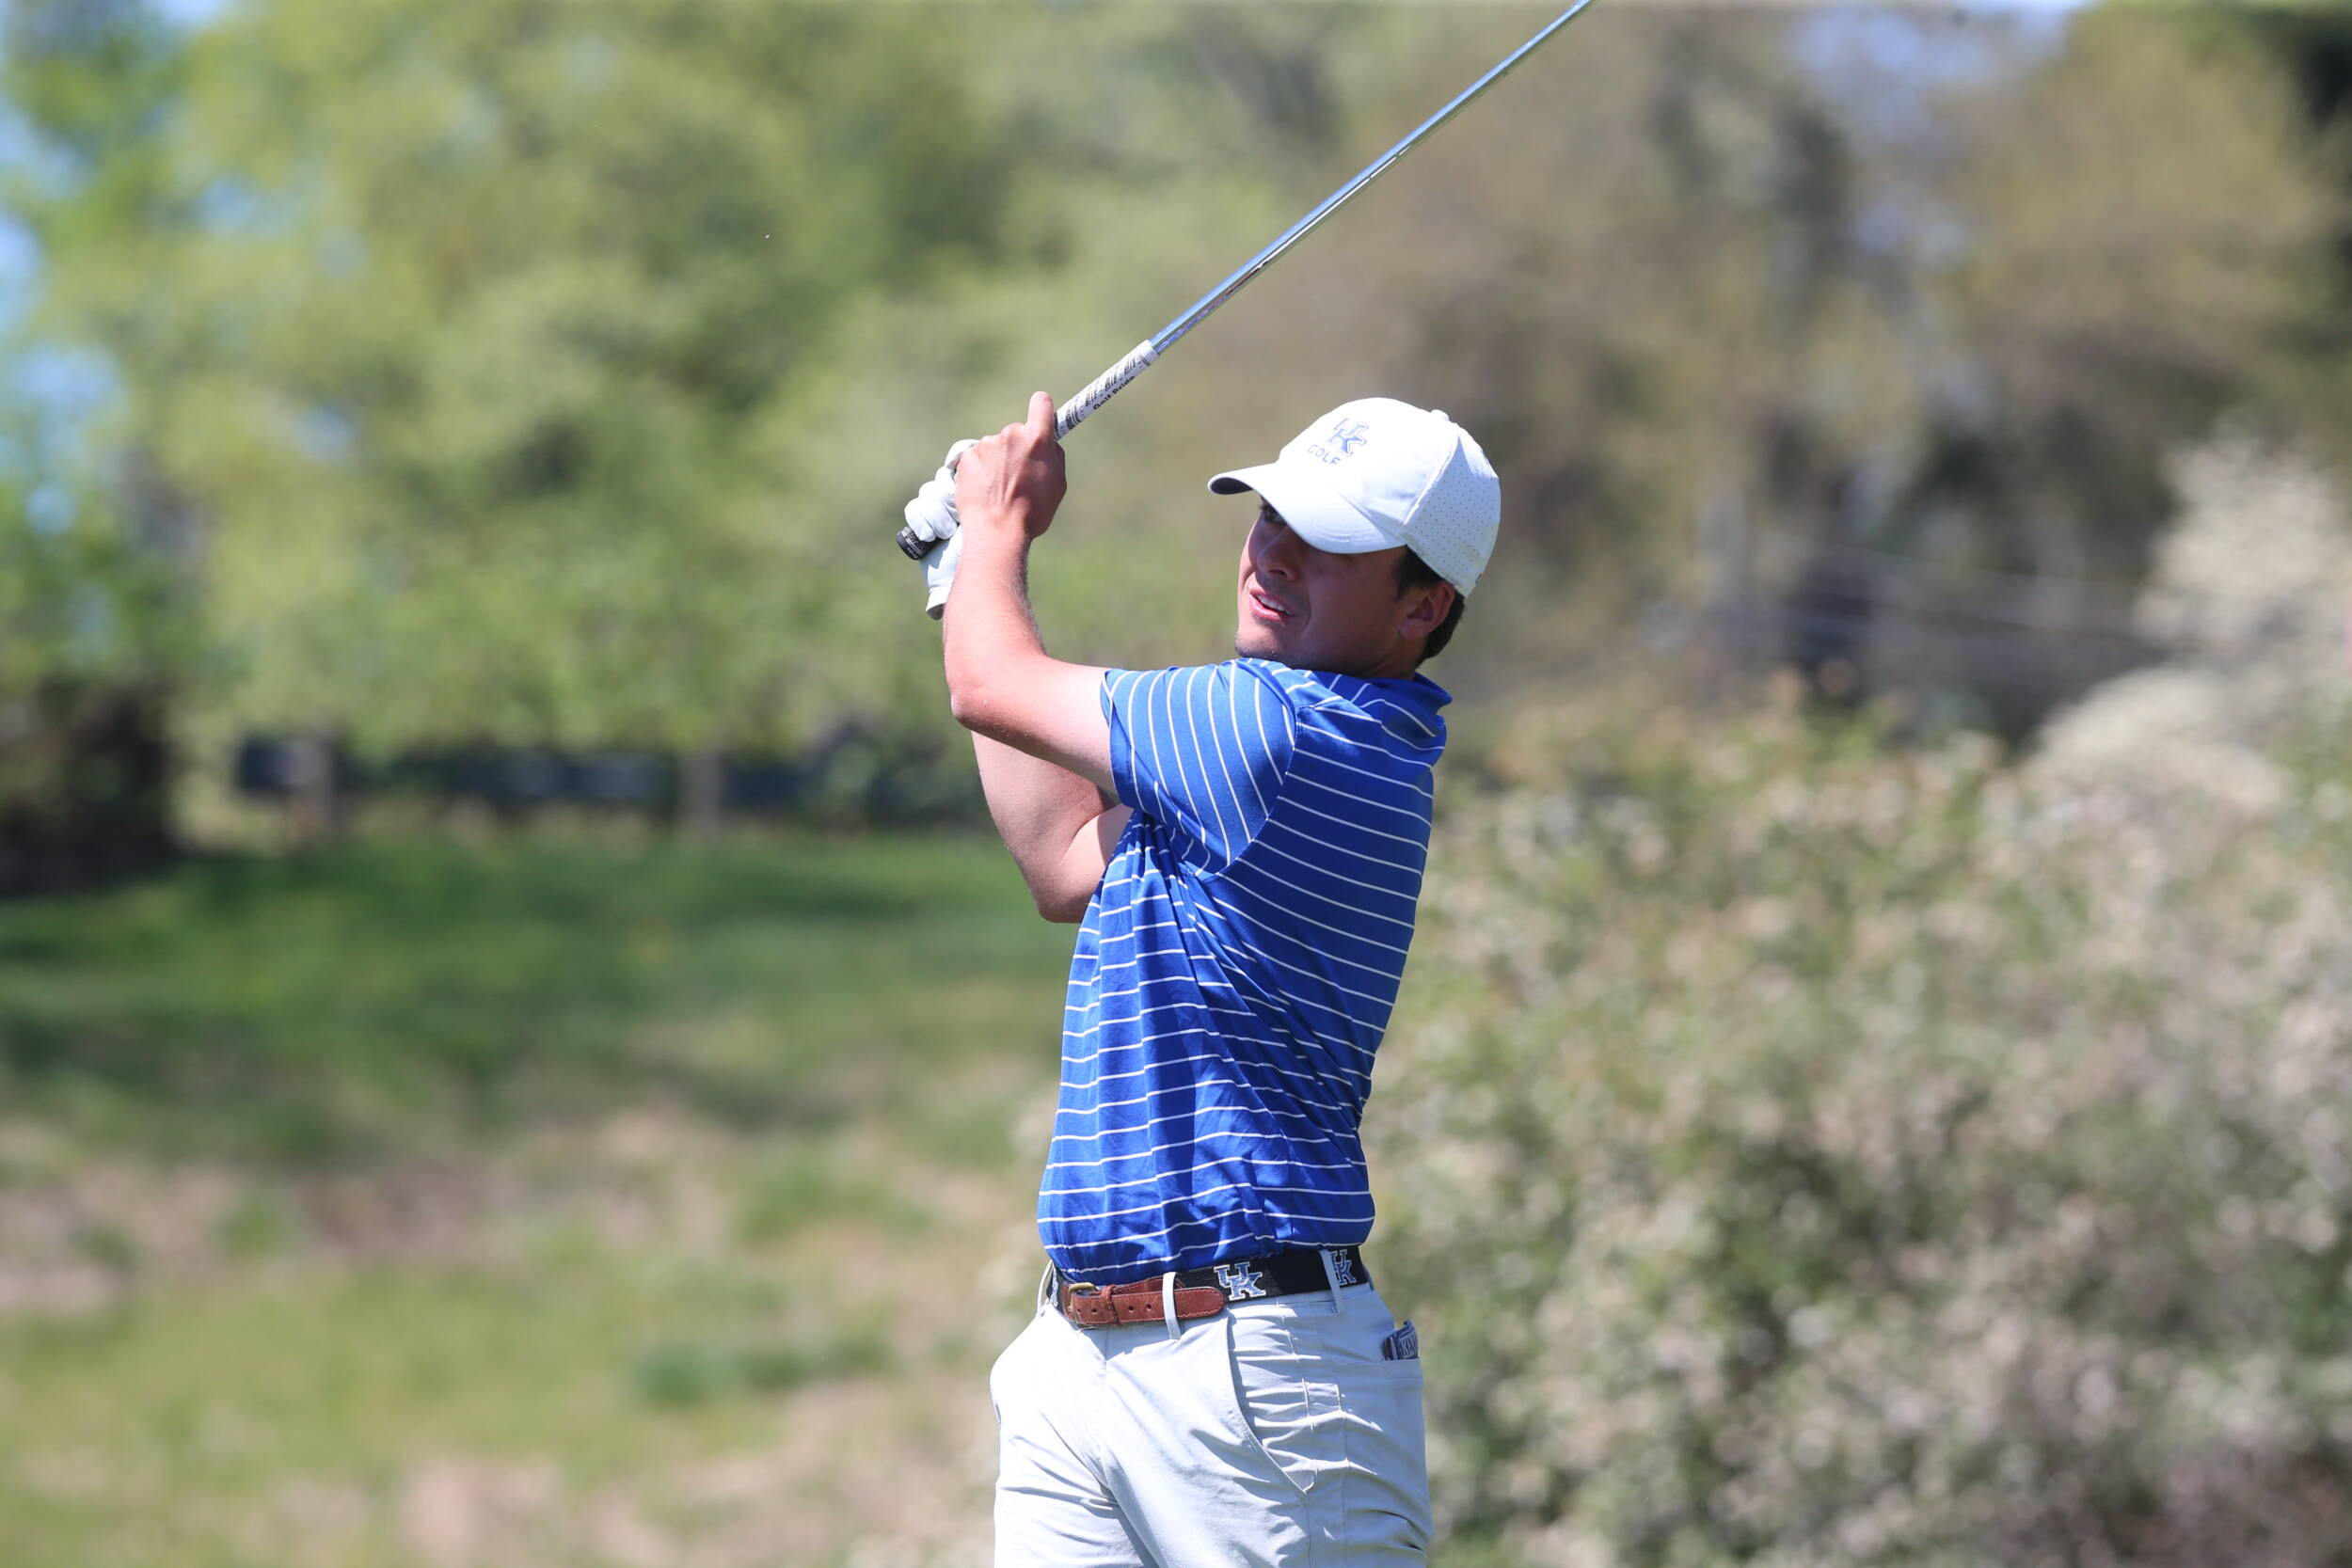 Alex Goff Selected to Participate as Individual in NCAA Auburn Regional